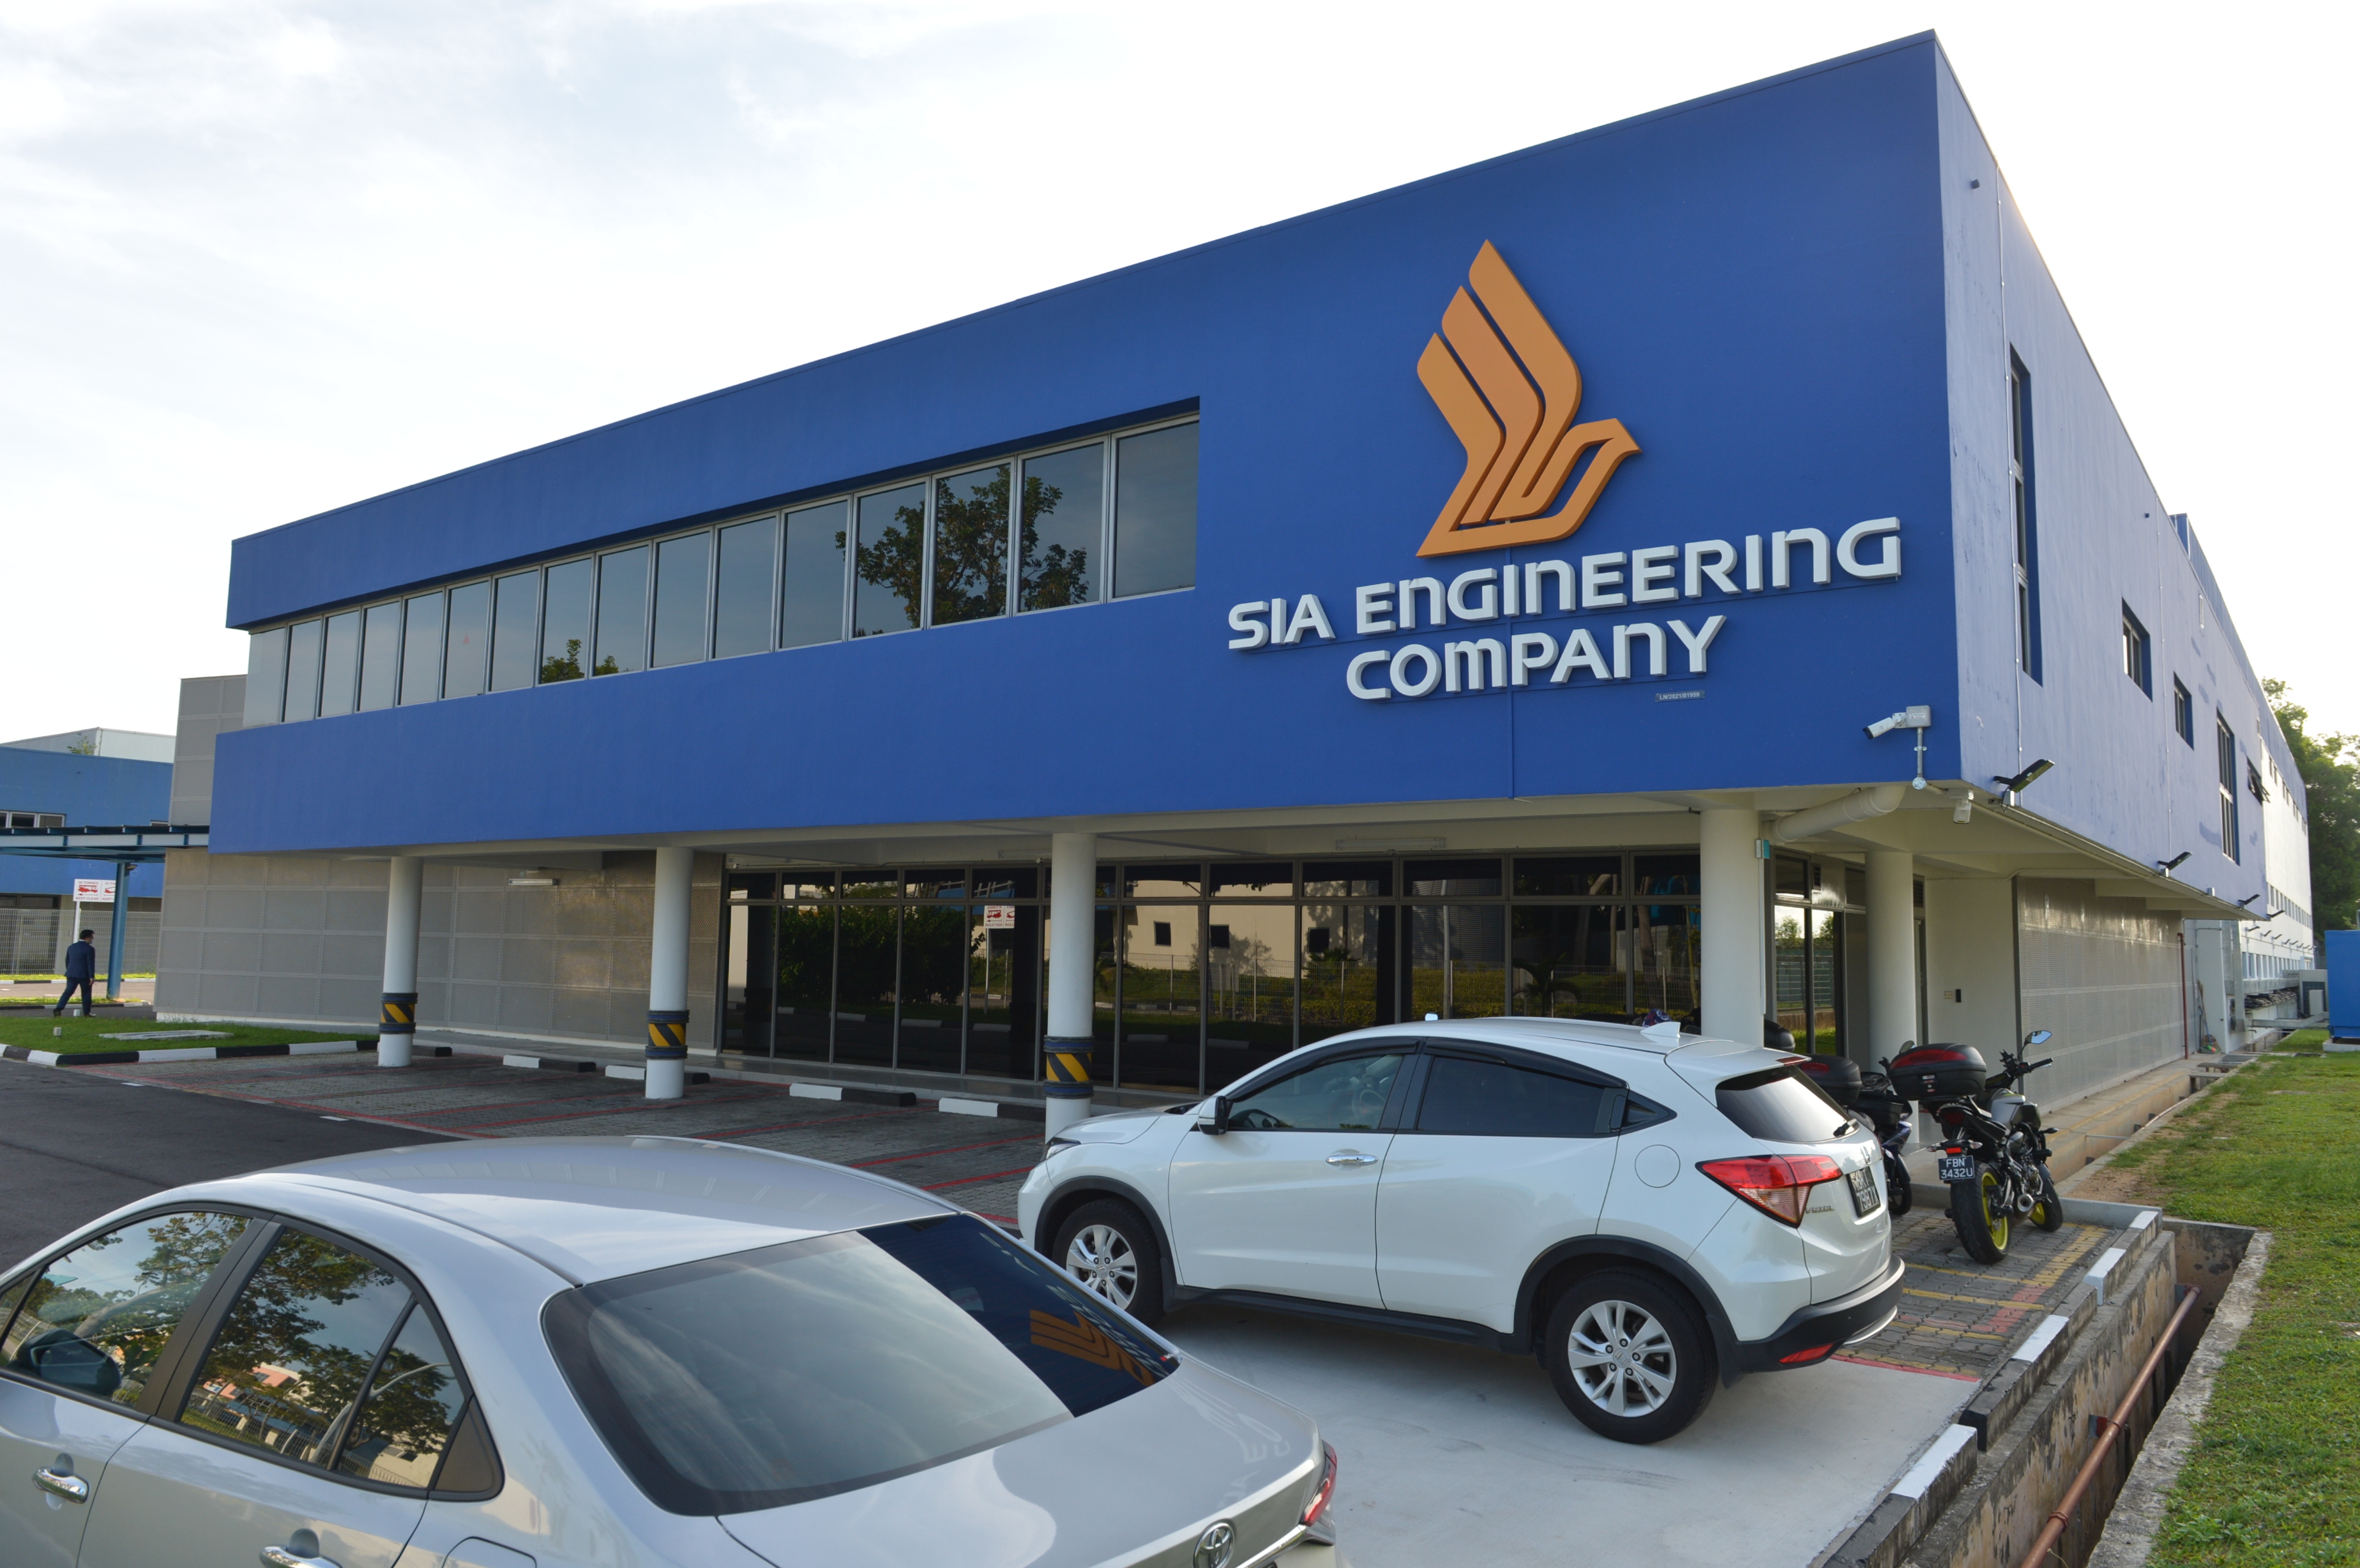 SIA Engineering Company to provide engine maintenance services for CFM LEAP-1A and -1B engines